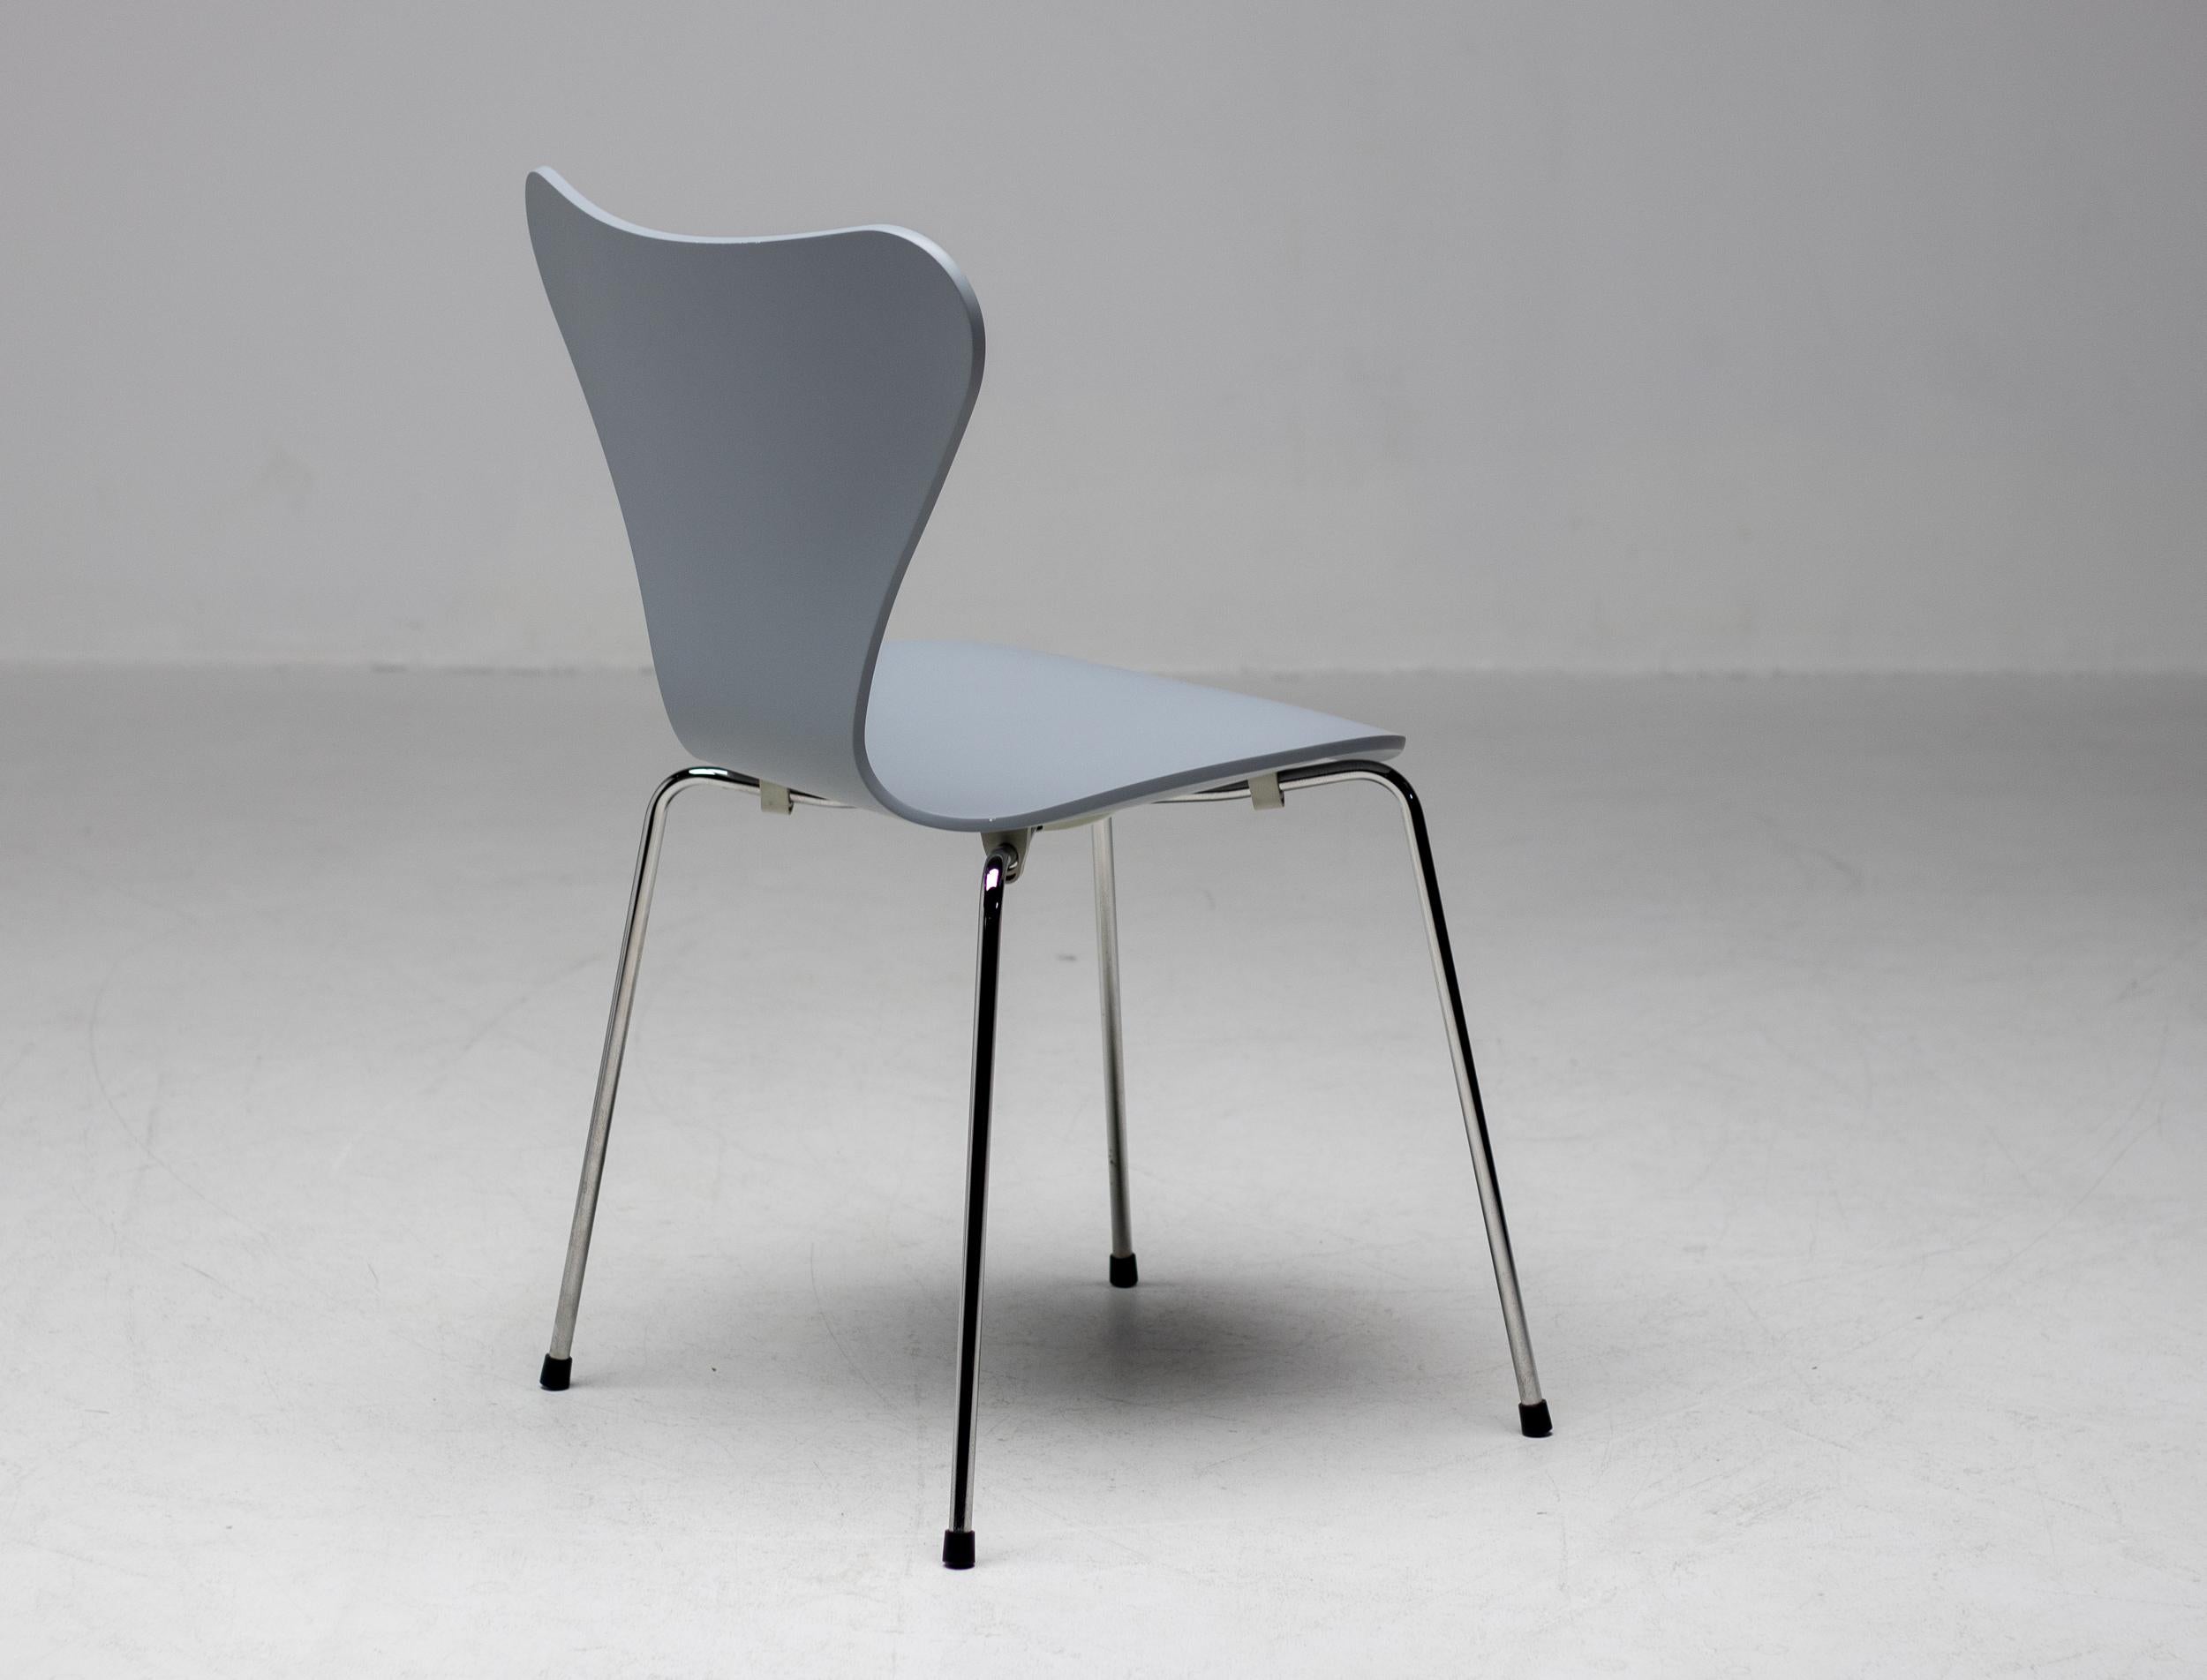 Limited Edition made in 2009 of the iconic Arne Jacobsen series 7 chair.
To pay tribute to this design, Fritz Hansen choose 7 designers from the young generation to pick out their favorite color. Maarten Baas became one of the leading designers of